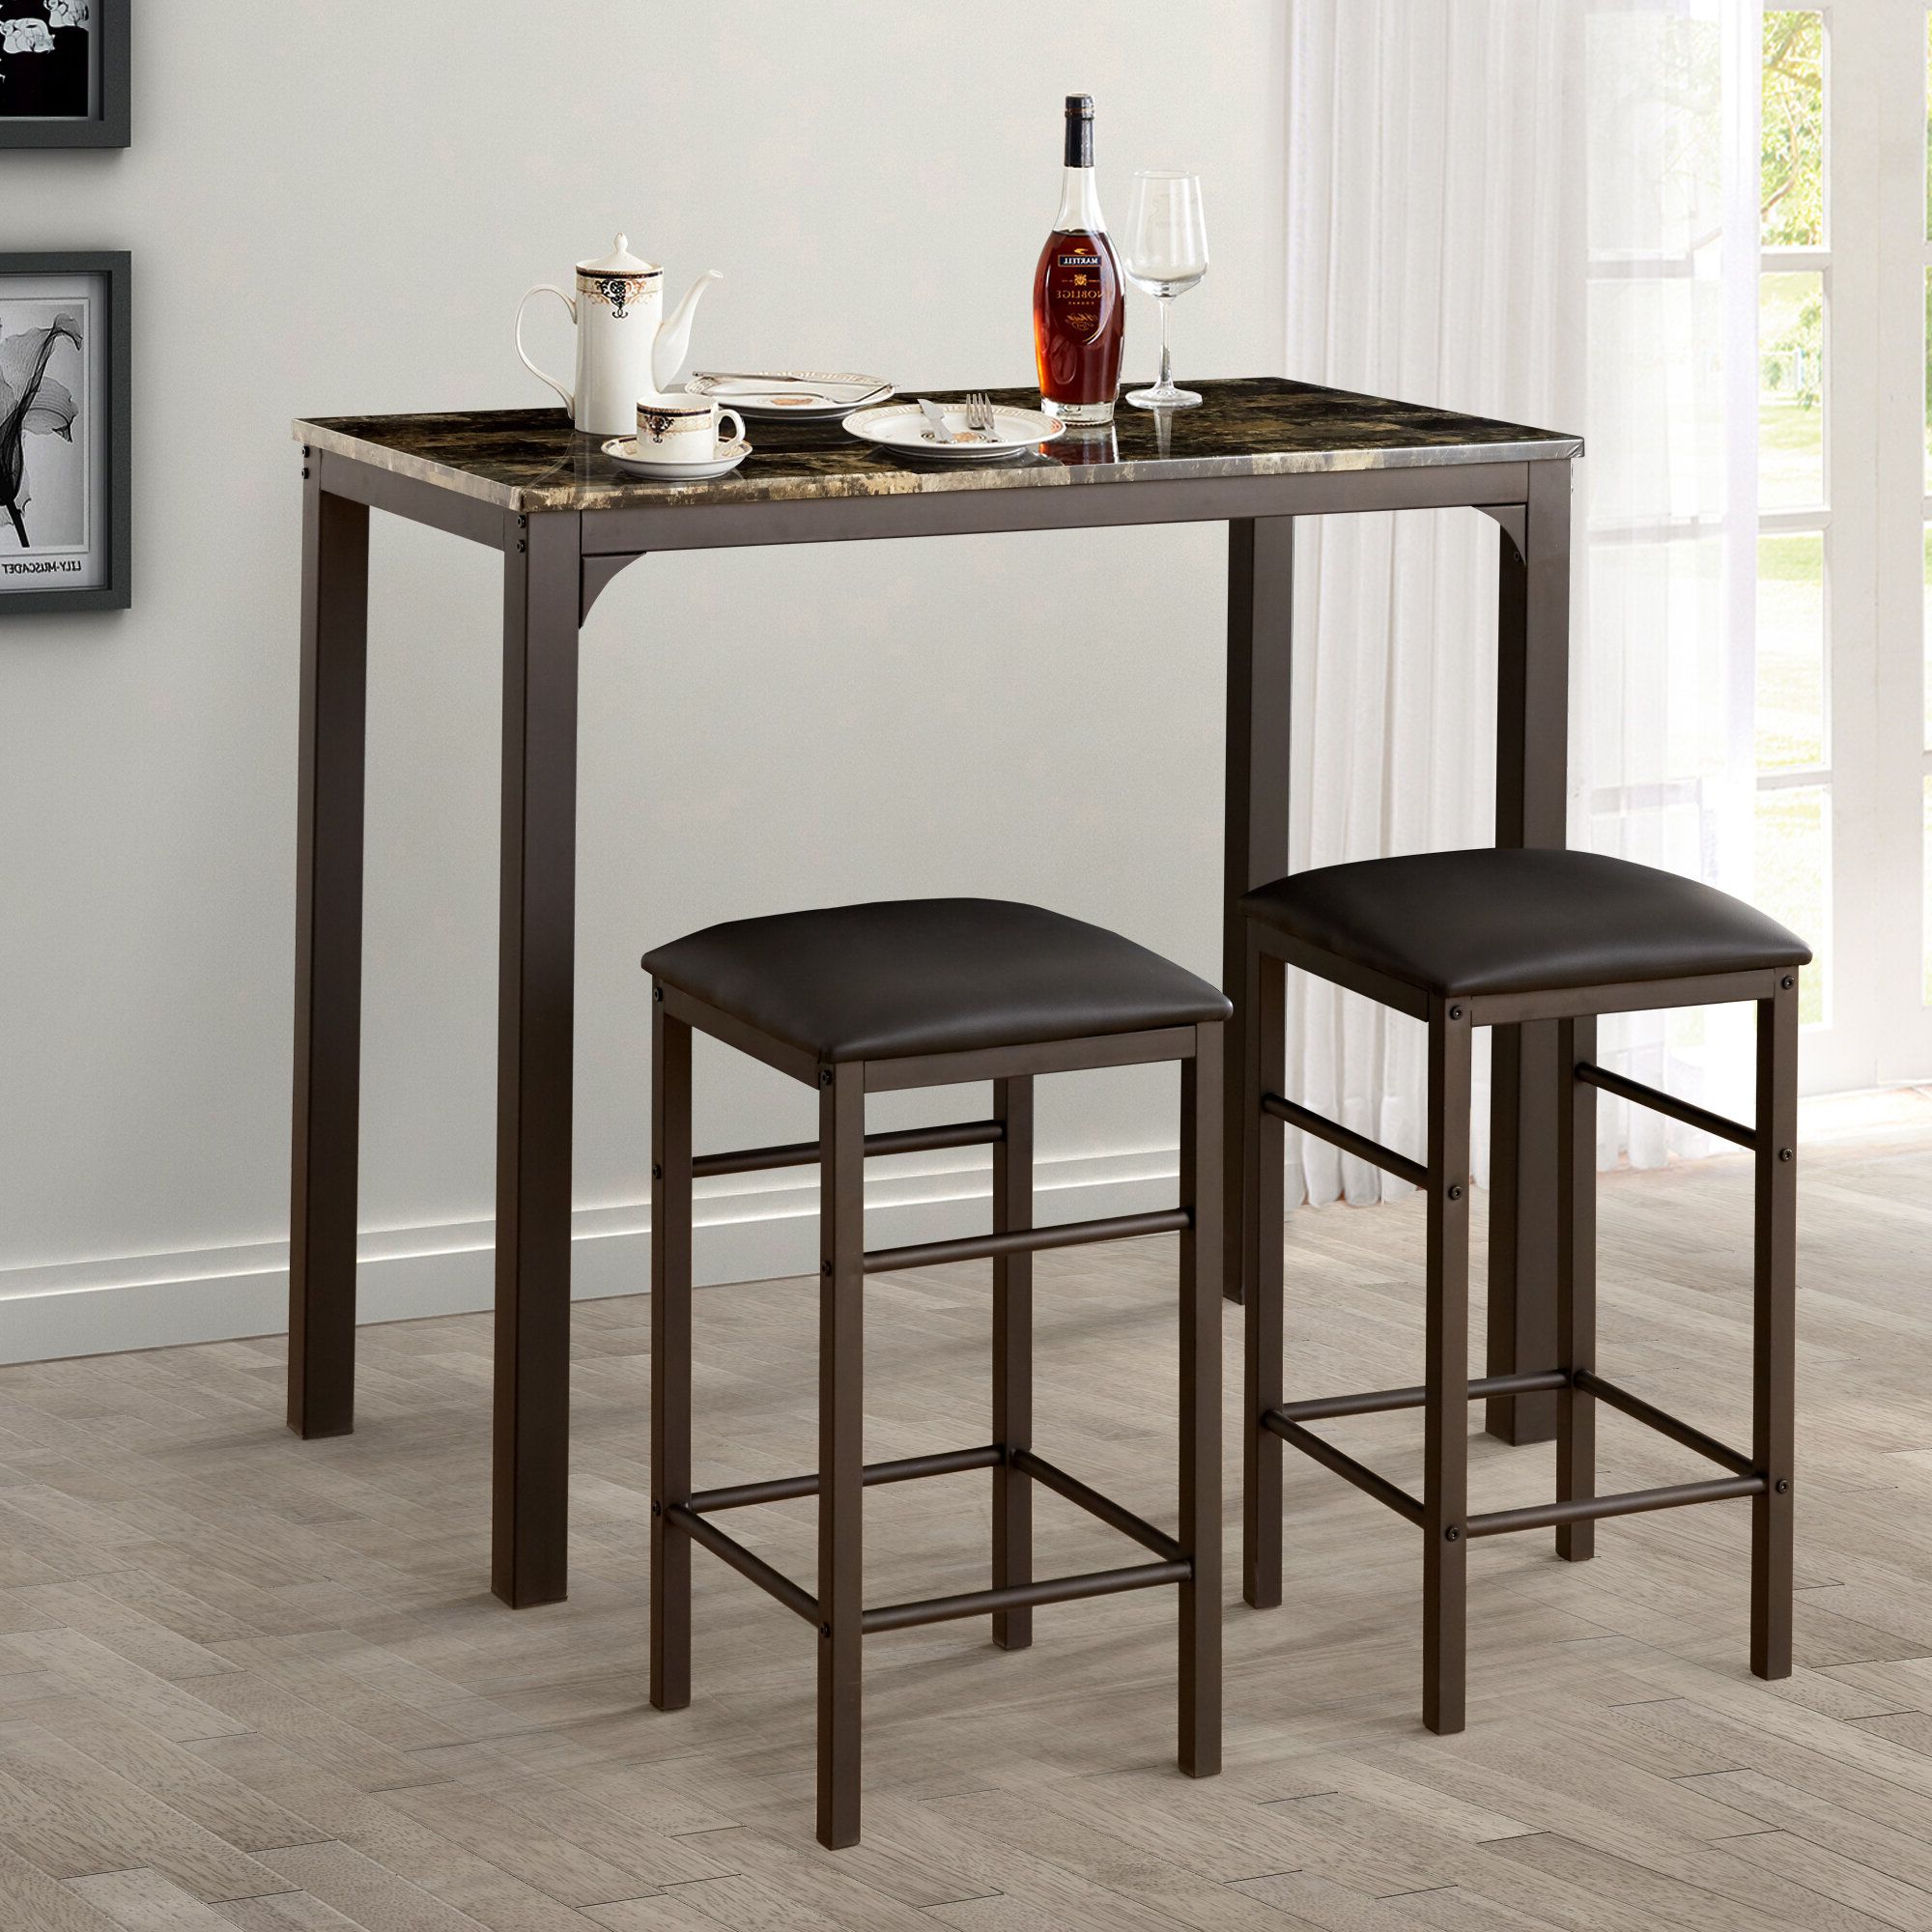 Widely Used Lillard 3 Piece Breakfast Nook Dining Set In Lillard 3 Piece Breakfast Nook Dining Sets (View 1 of 20)